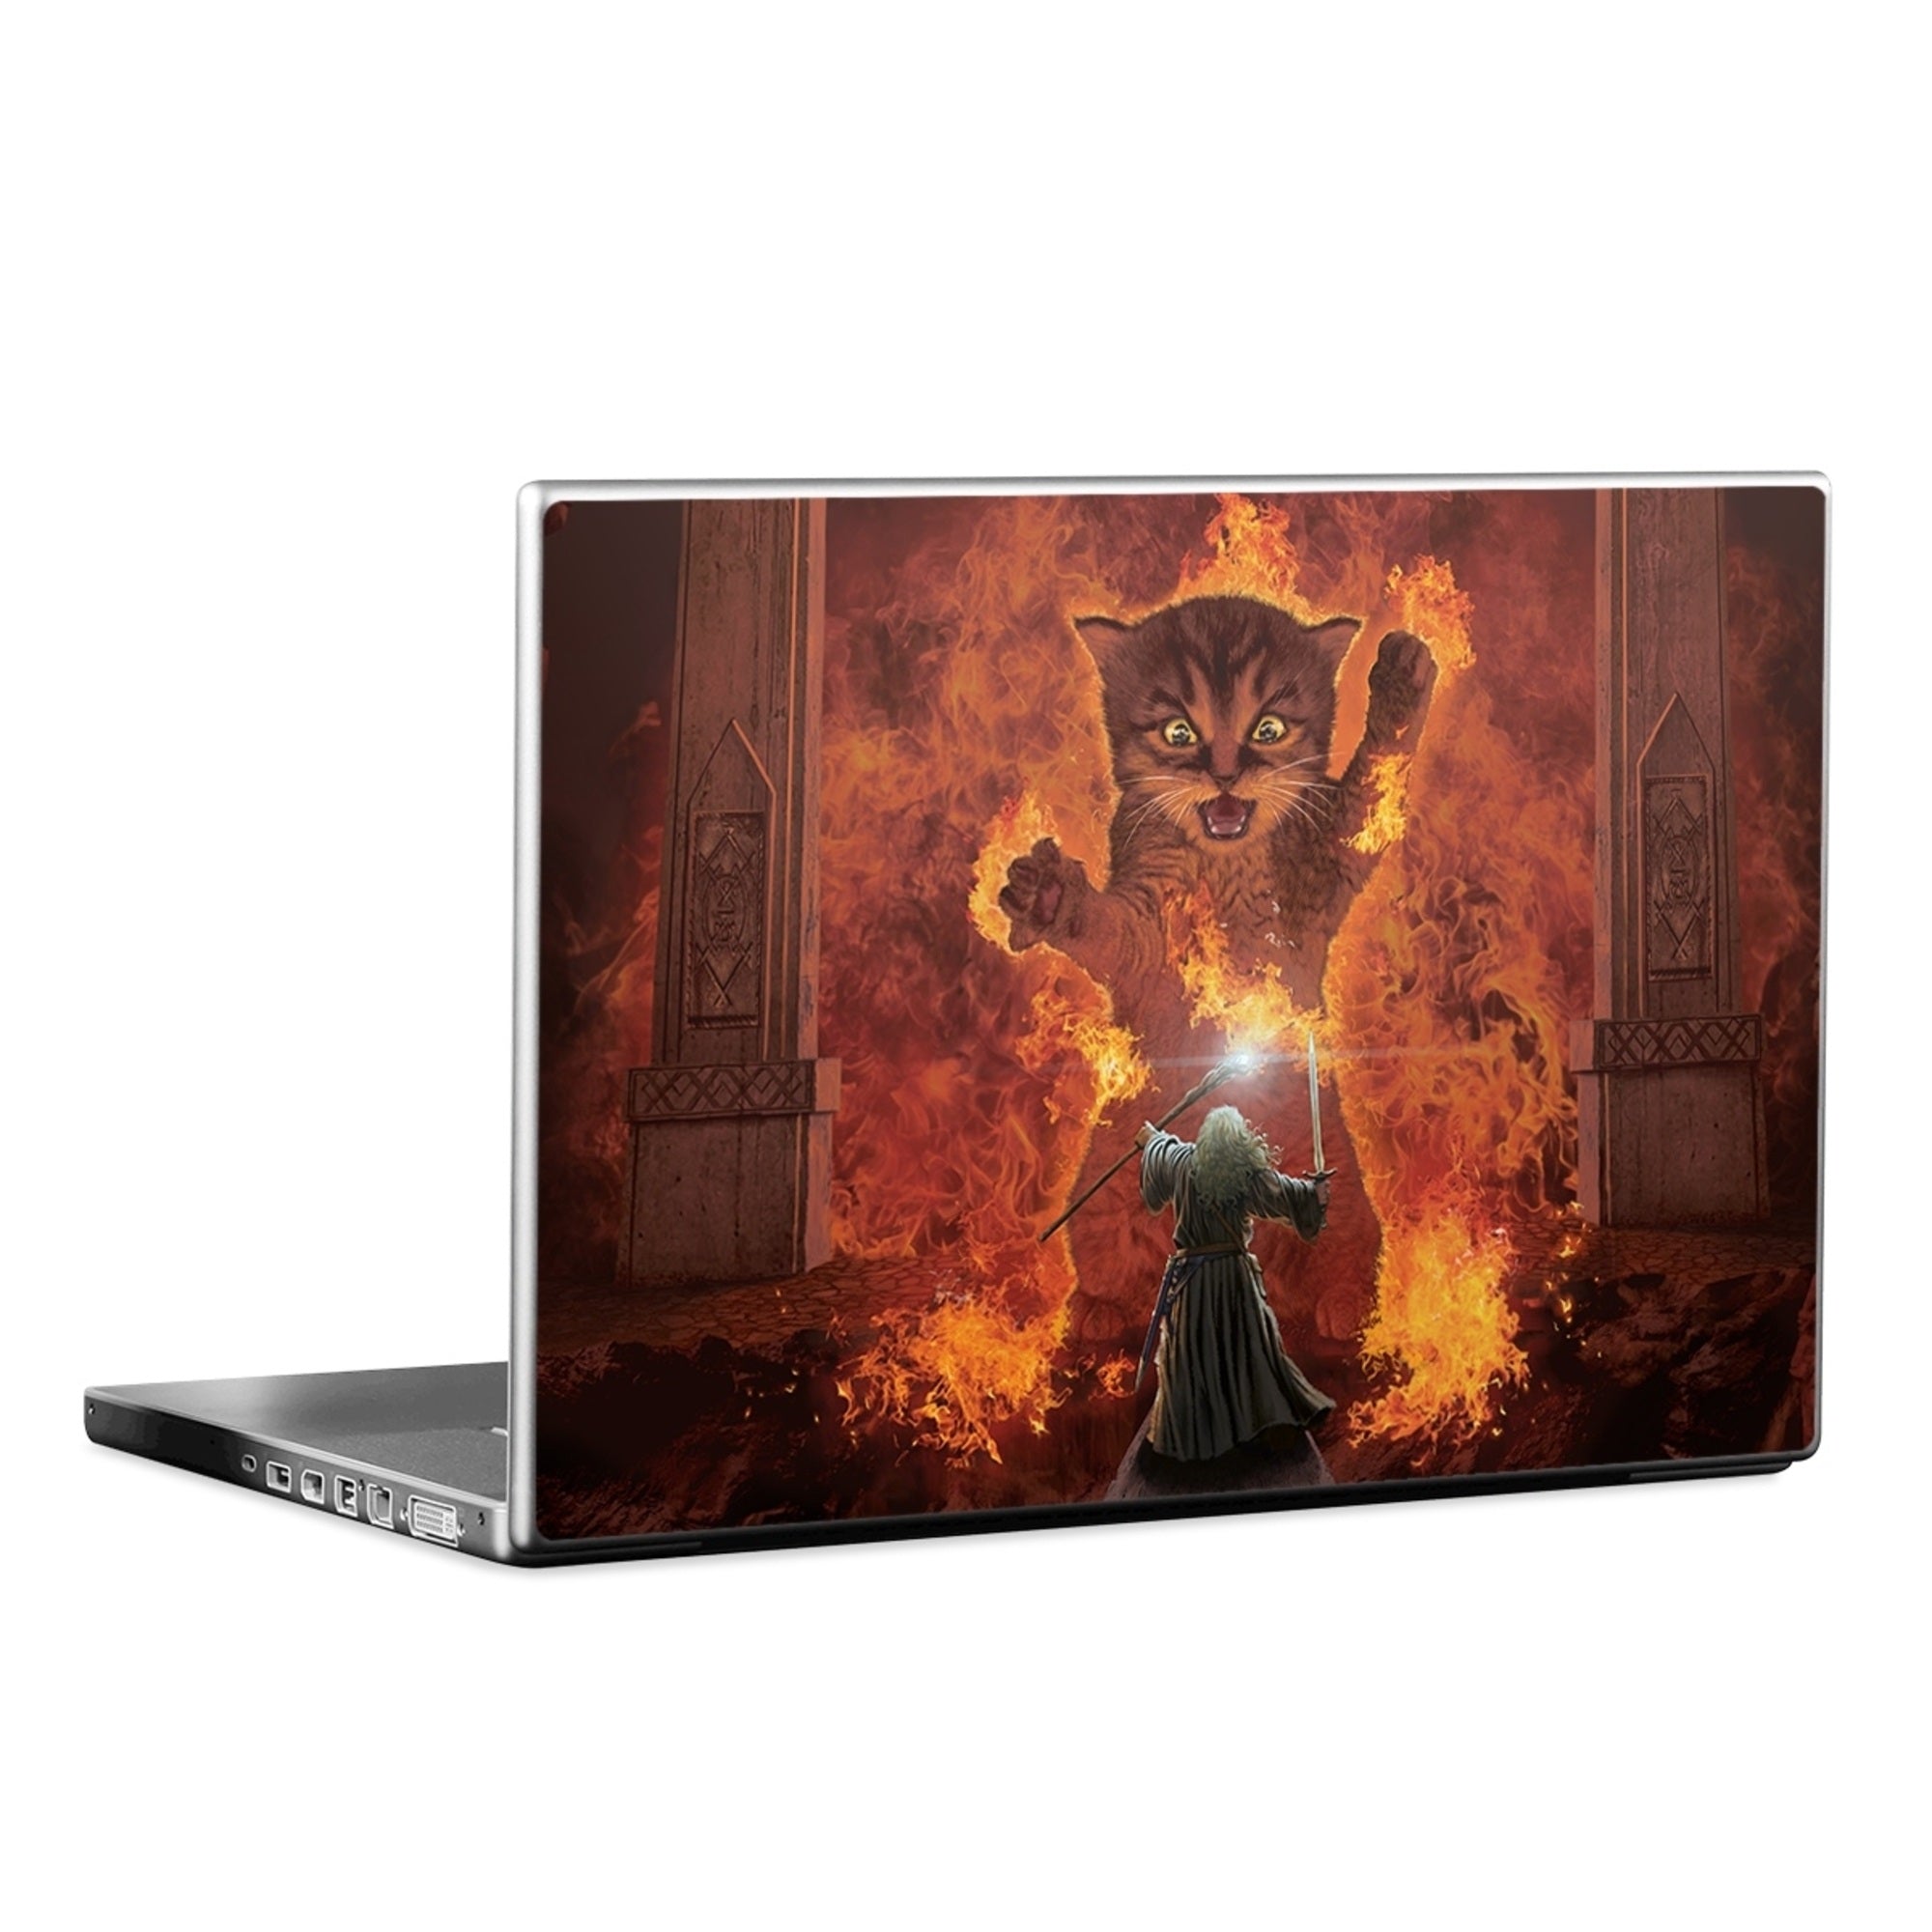 You Shall Not Pass - Laptop Lid Skin